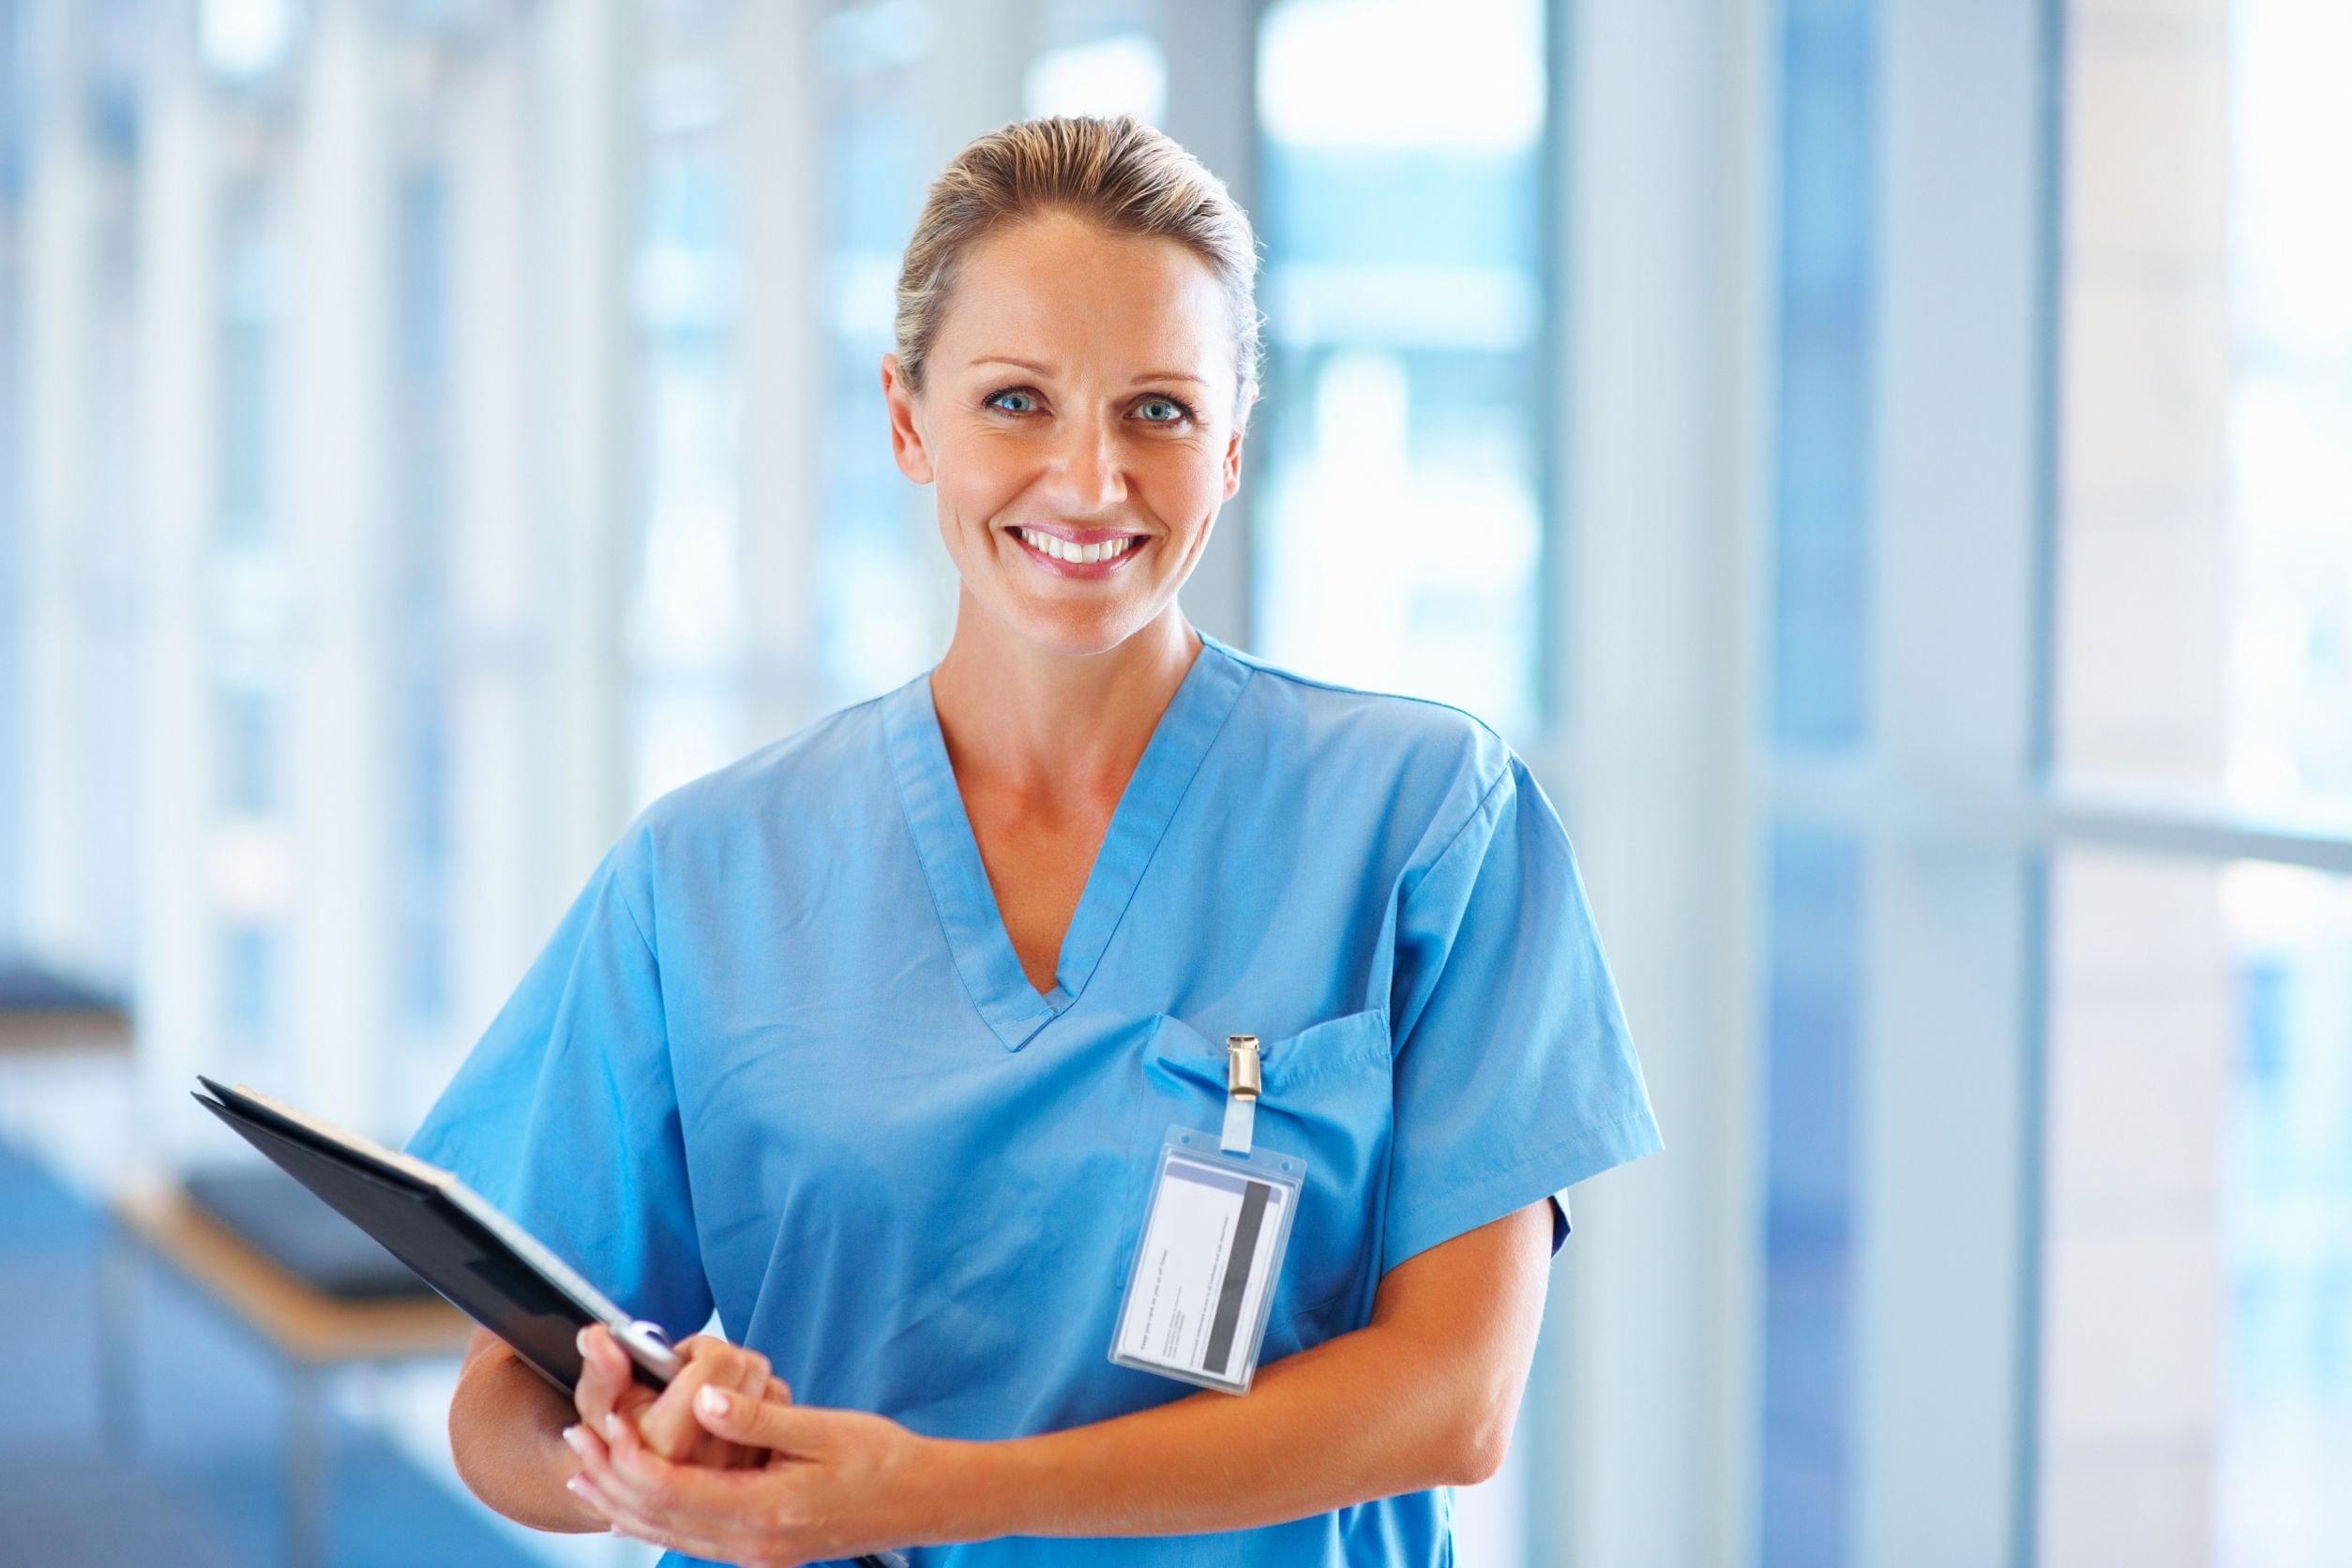 Non certified medical assistant jobs in houston texas